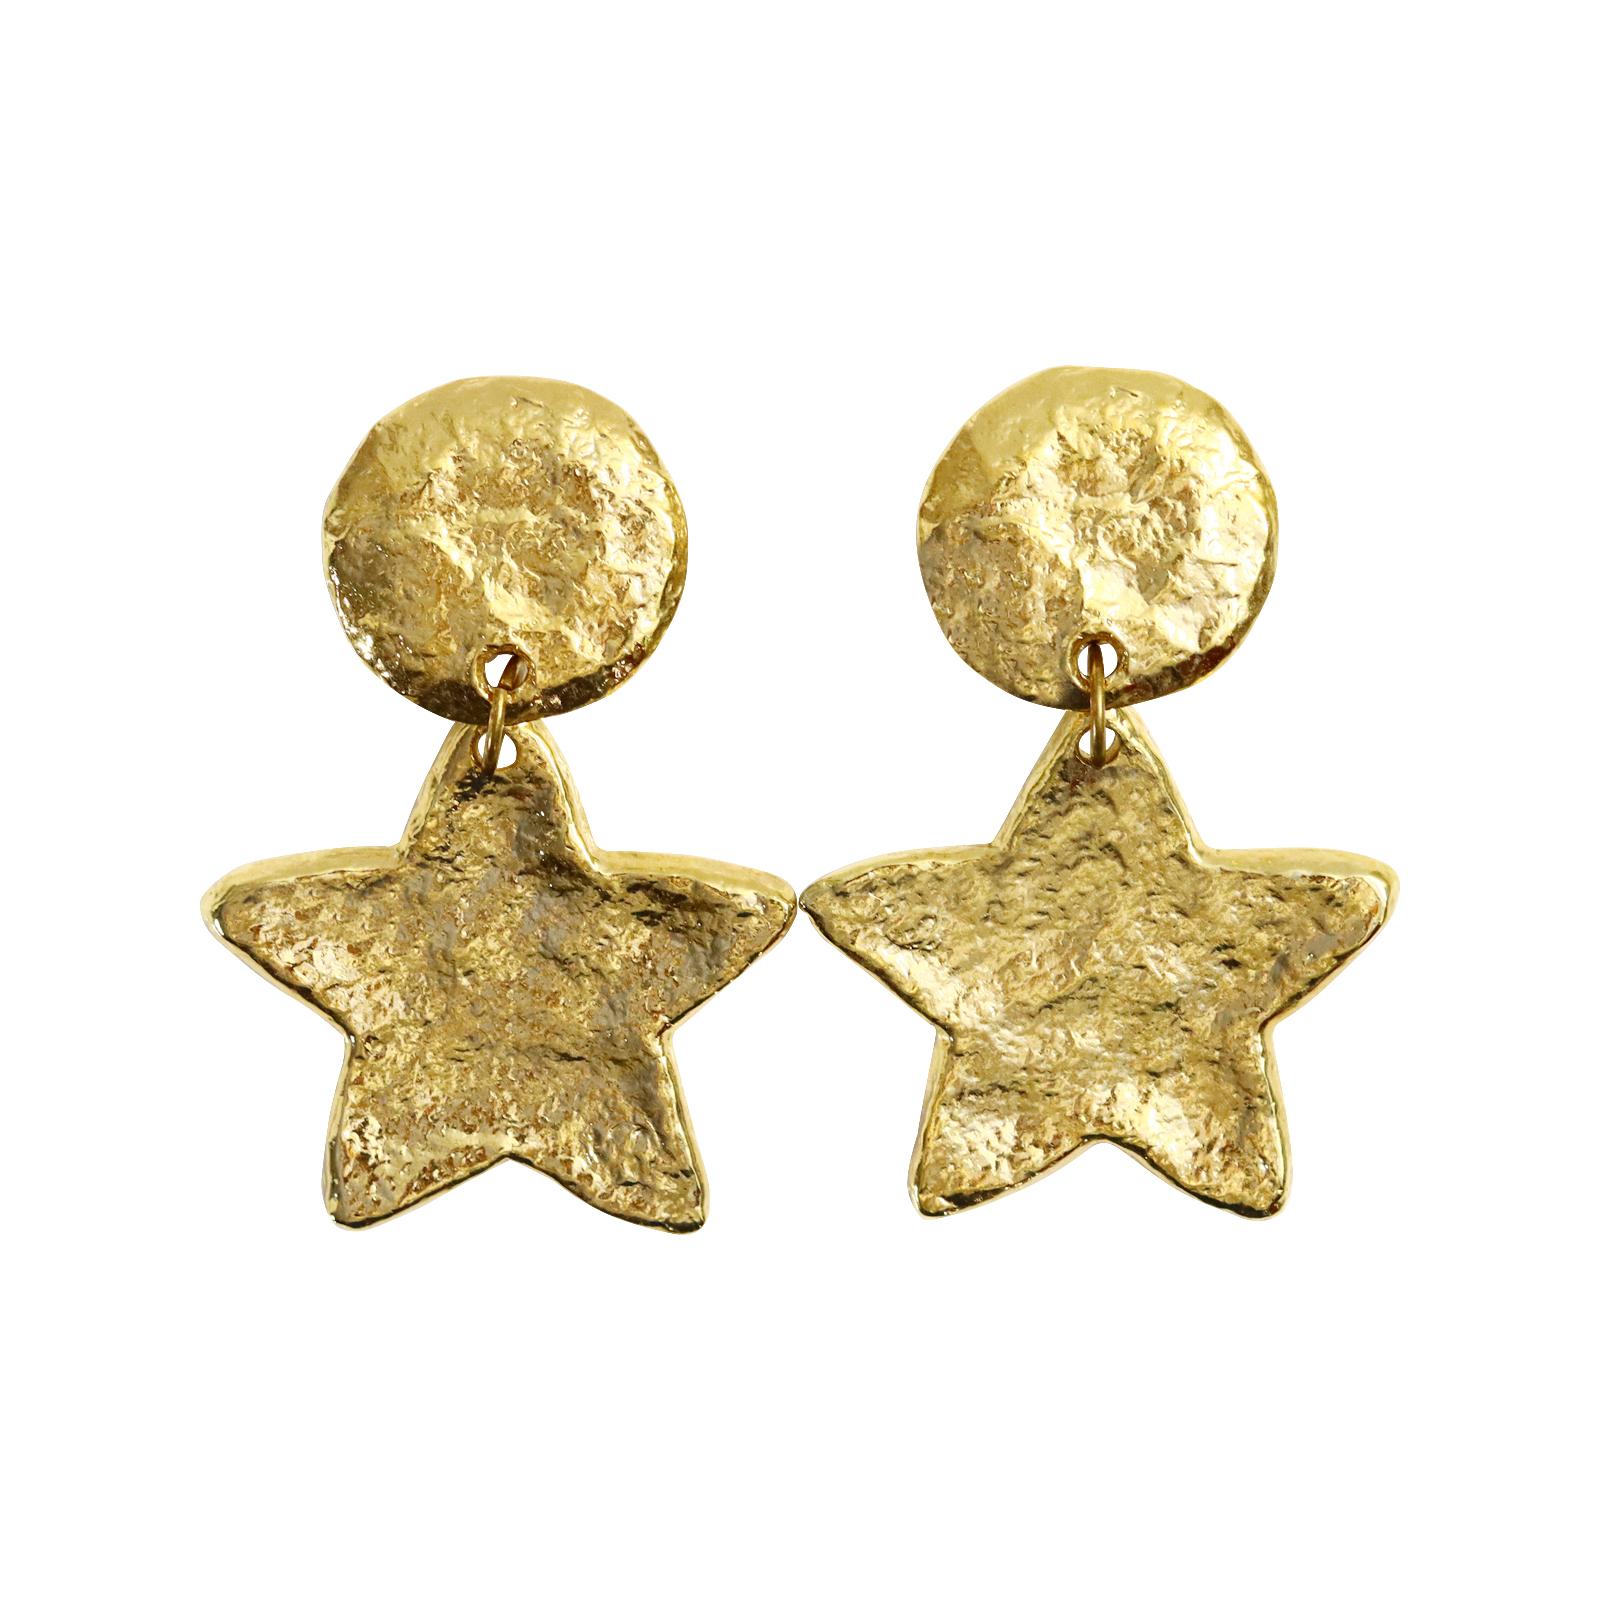 Vintage Gold Tone Resin Dangling Star Earrings In Good Condition For Sale In New York, NY